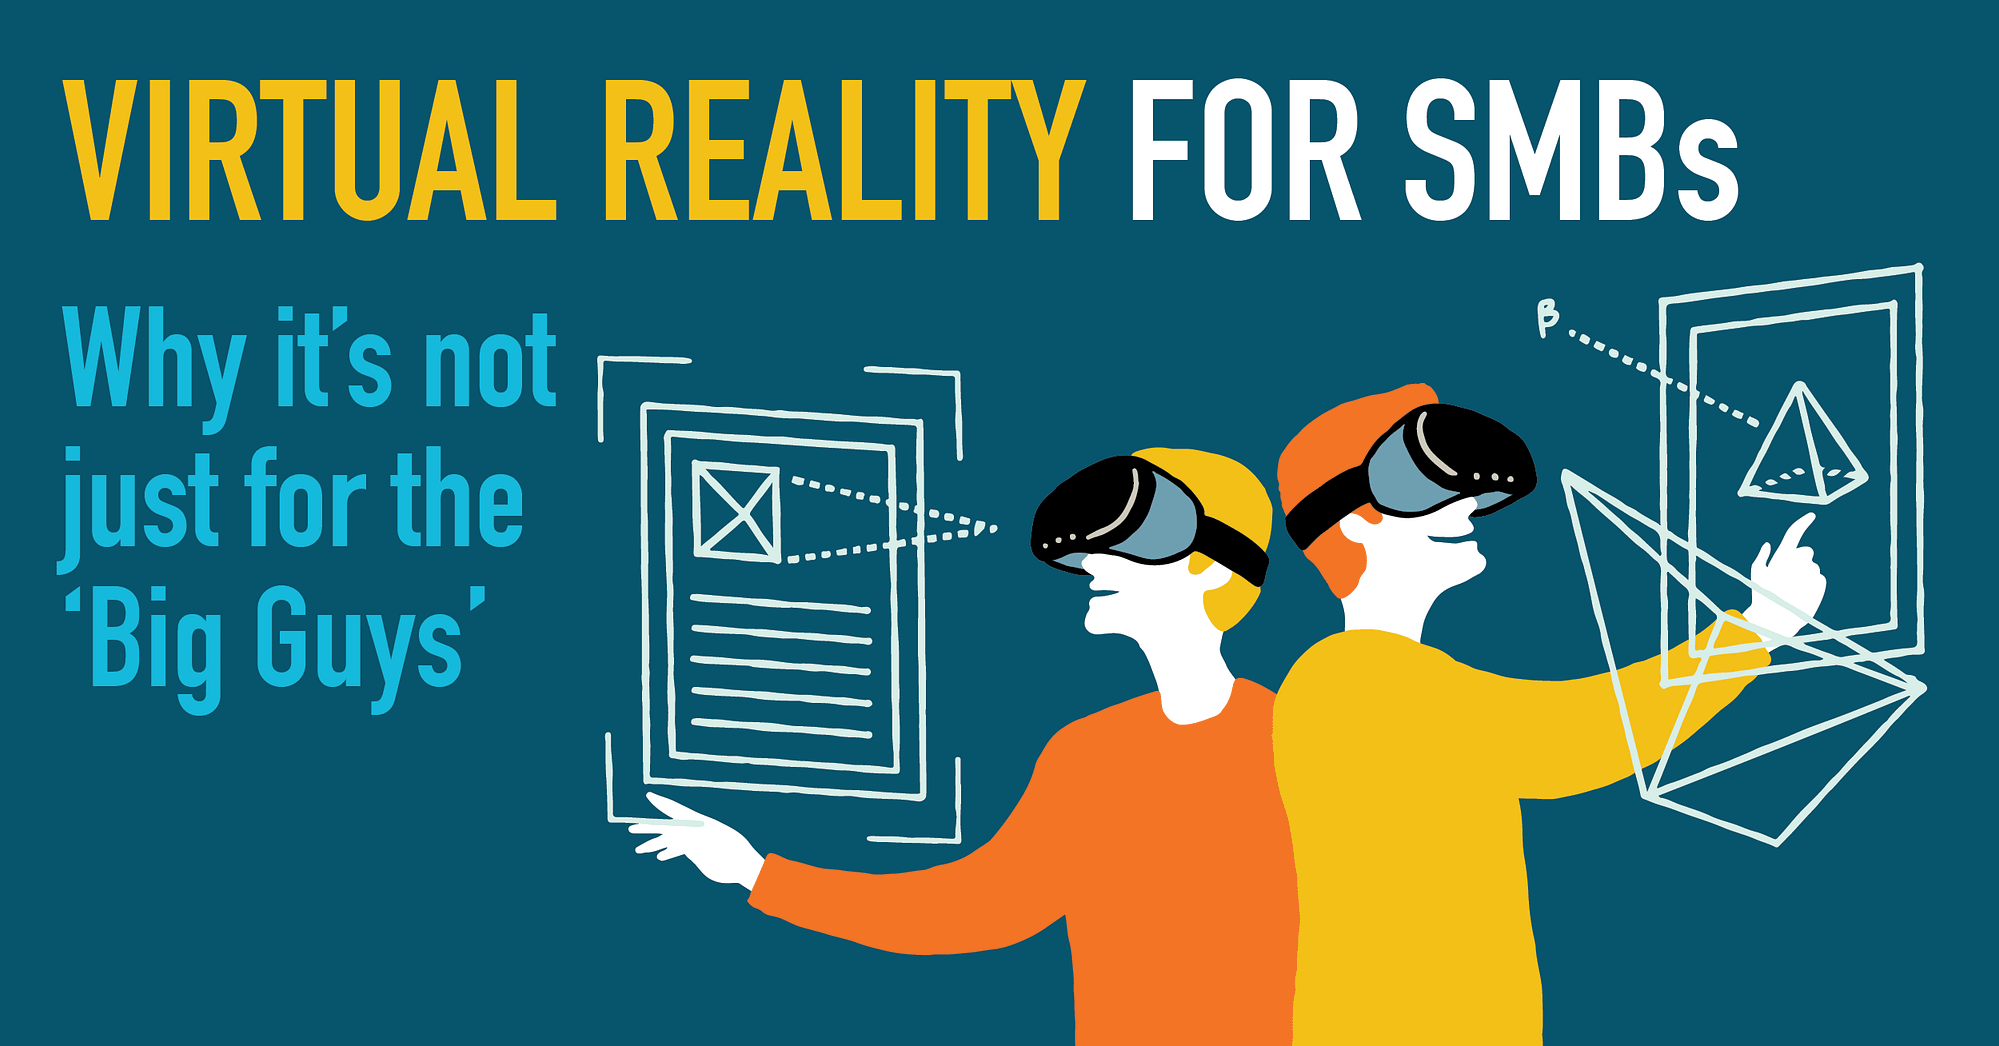 Virtual Reality Startups for SMBs: Why it’s not just for the ‘big guys’